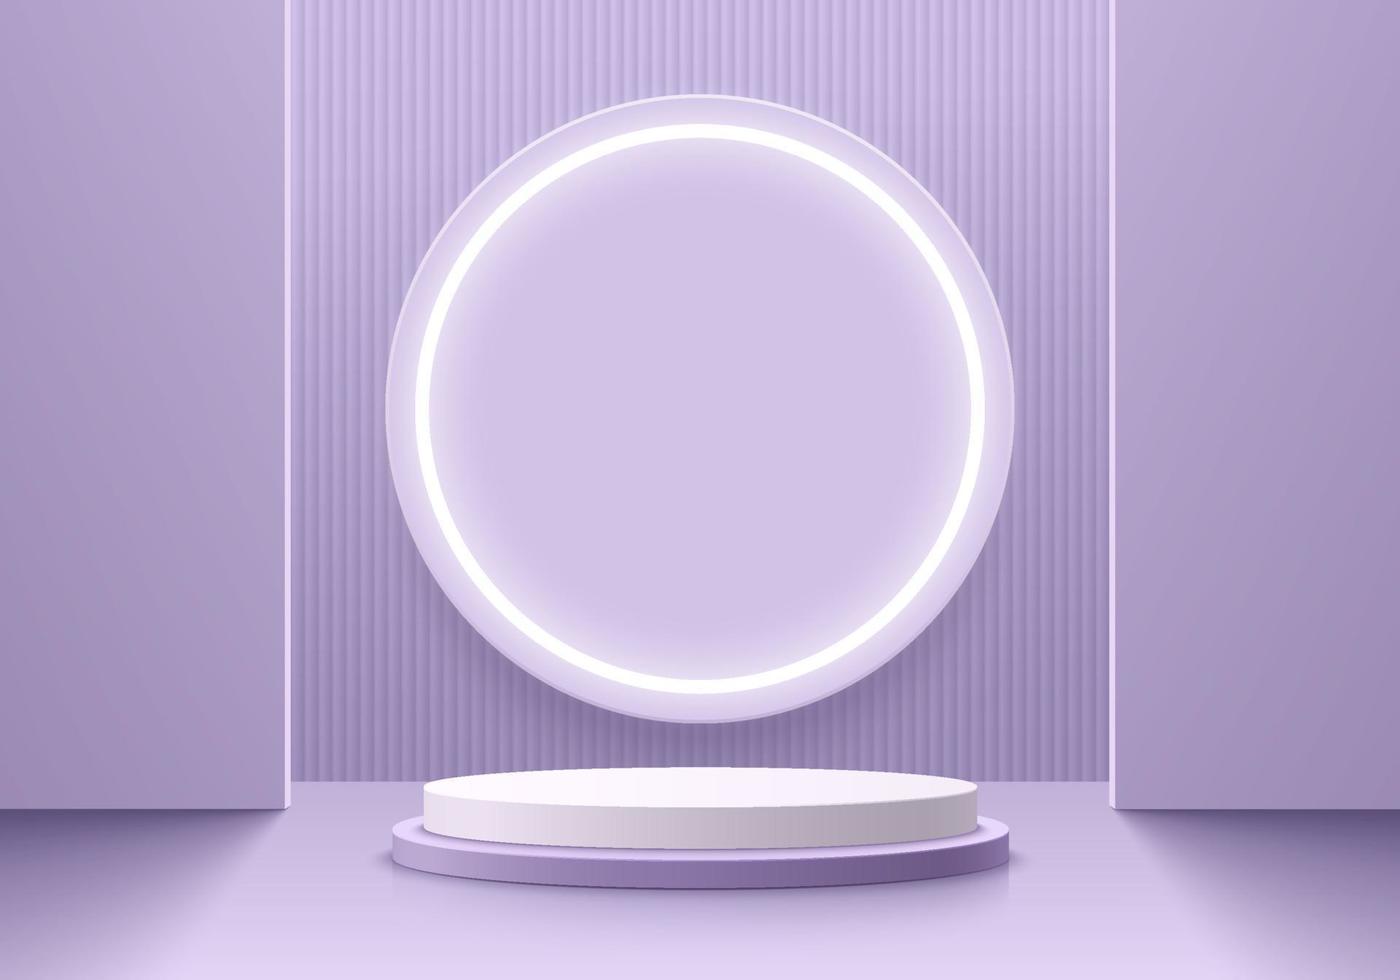 Realistic purple and white 3D cylinder pedestal podium with glowing neon round circle background. Abstract minimal scene for products stage showcase, promotion display. Vector pastel geometric forms.